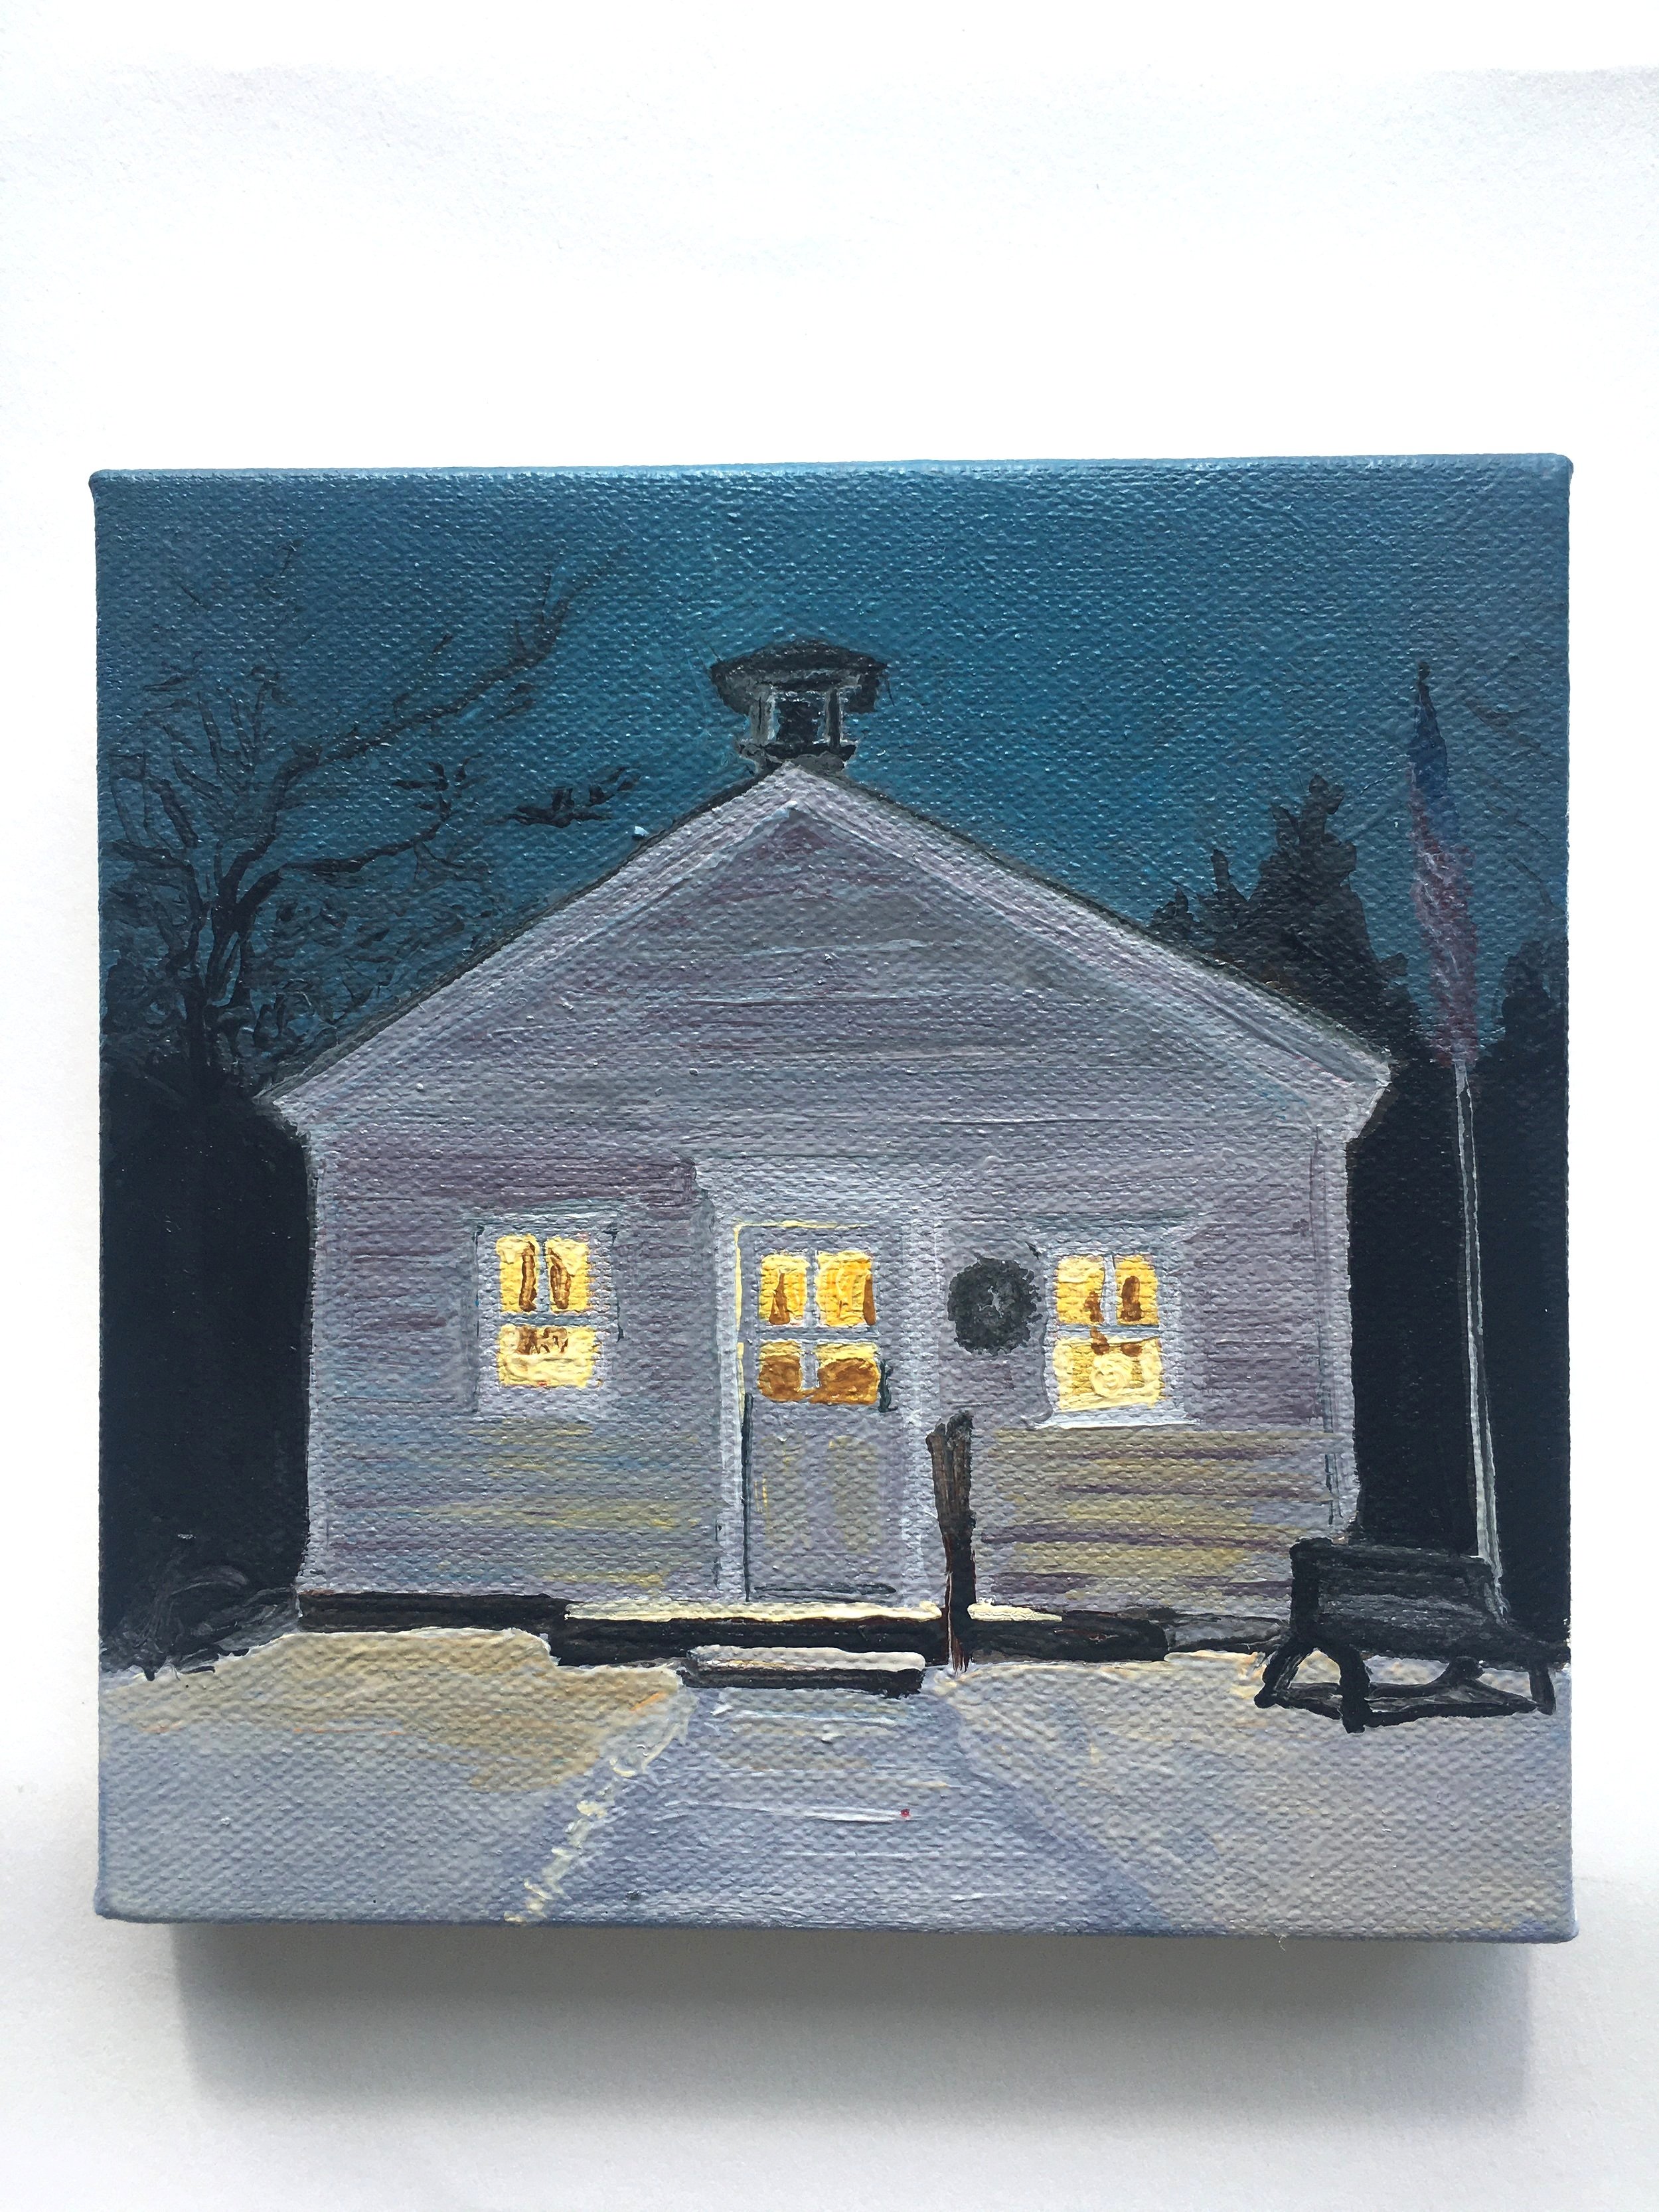   Old School House at Night,  Oil on Canvas, 6” x 6”, 2021 